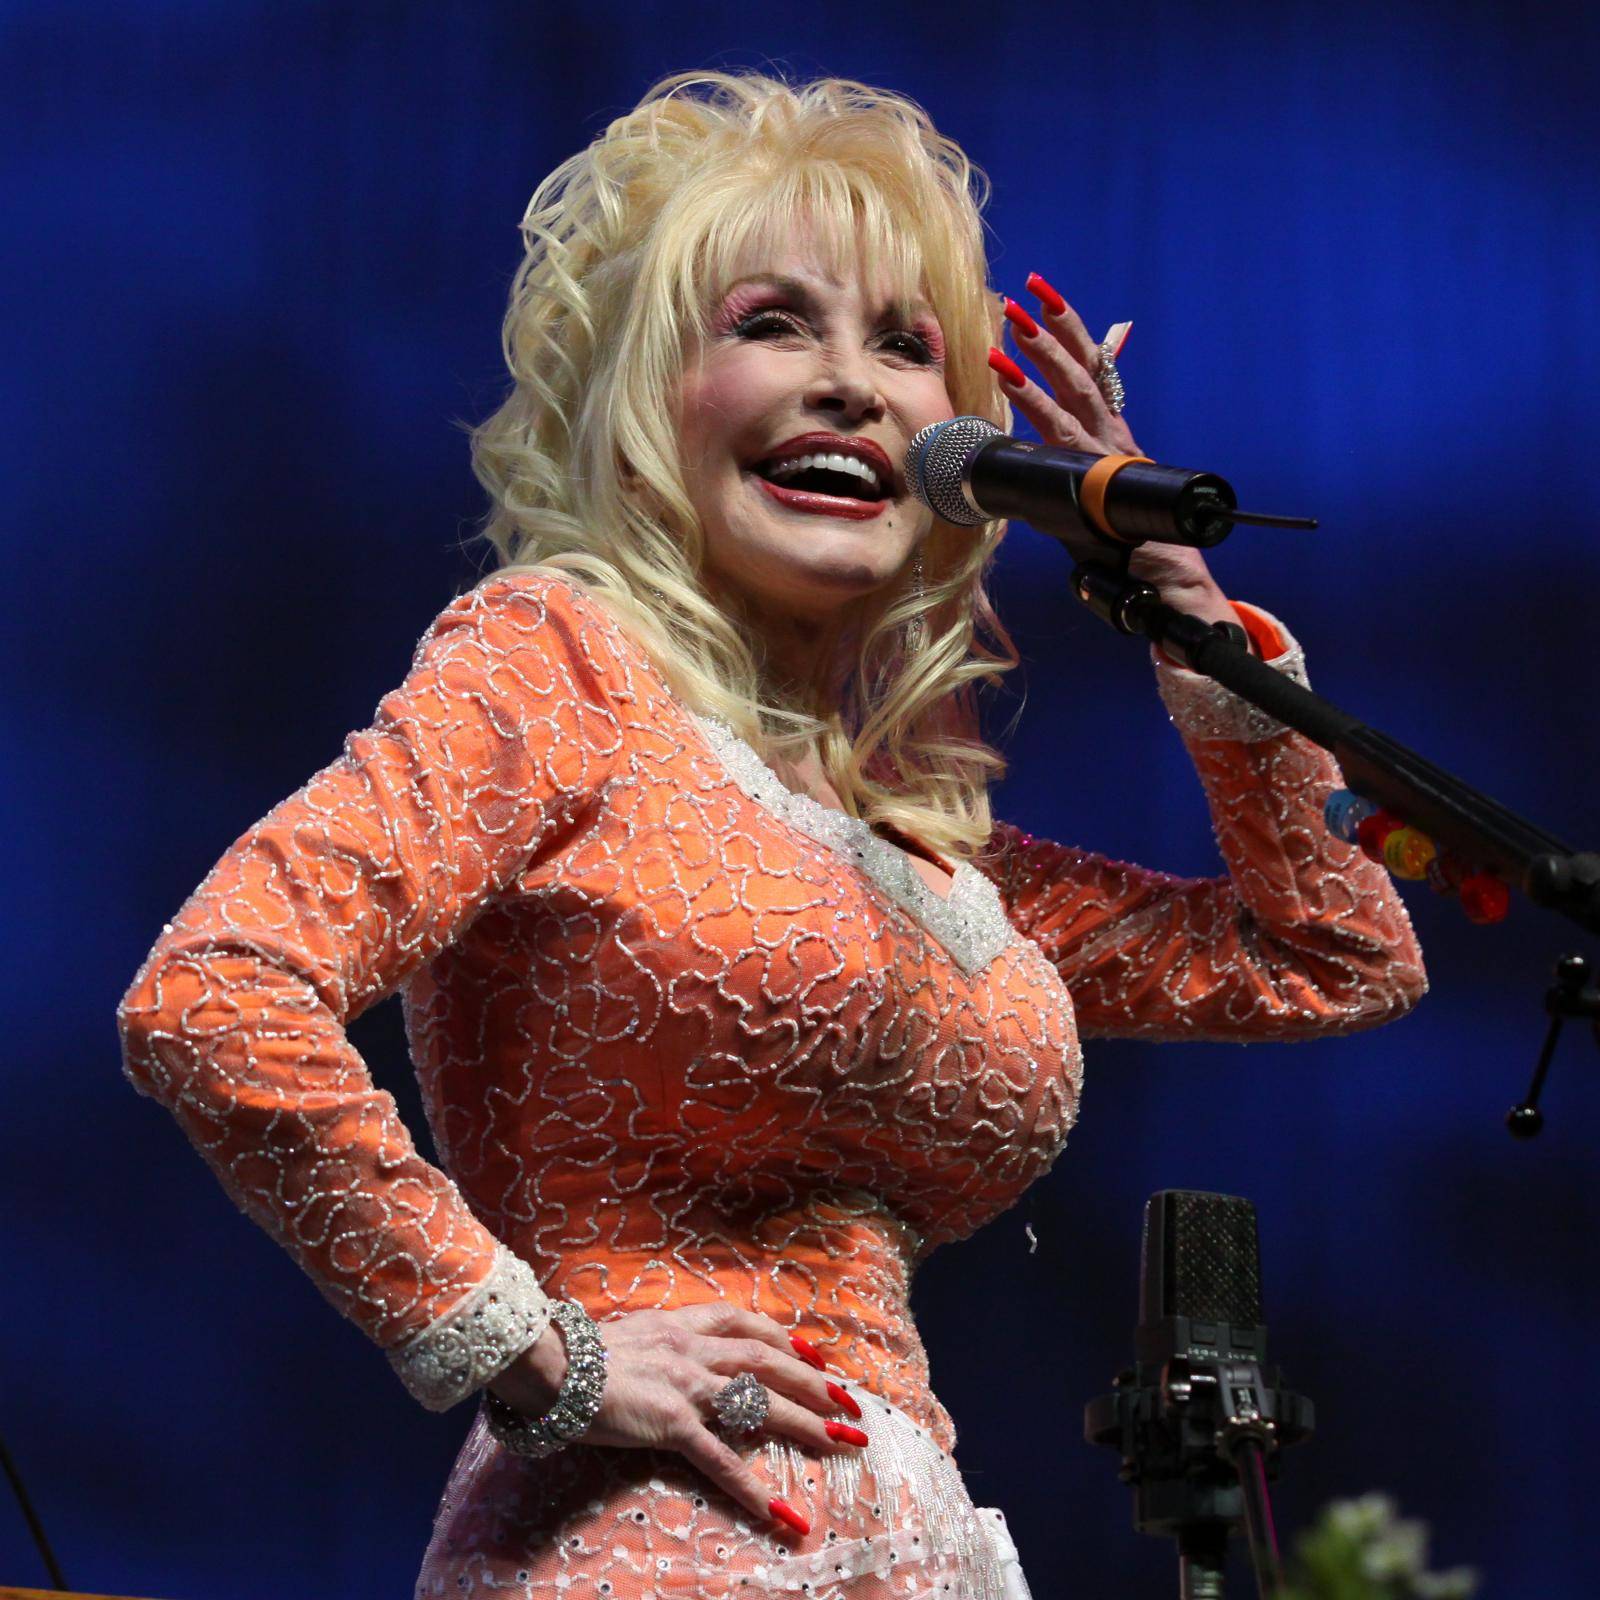 Dolly Parton Honorary Doctorate Degree - University of Tennessee